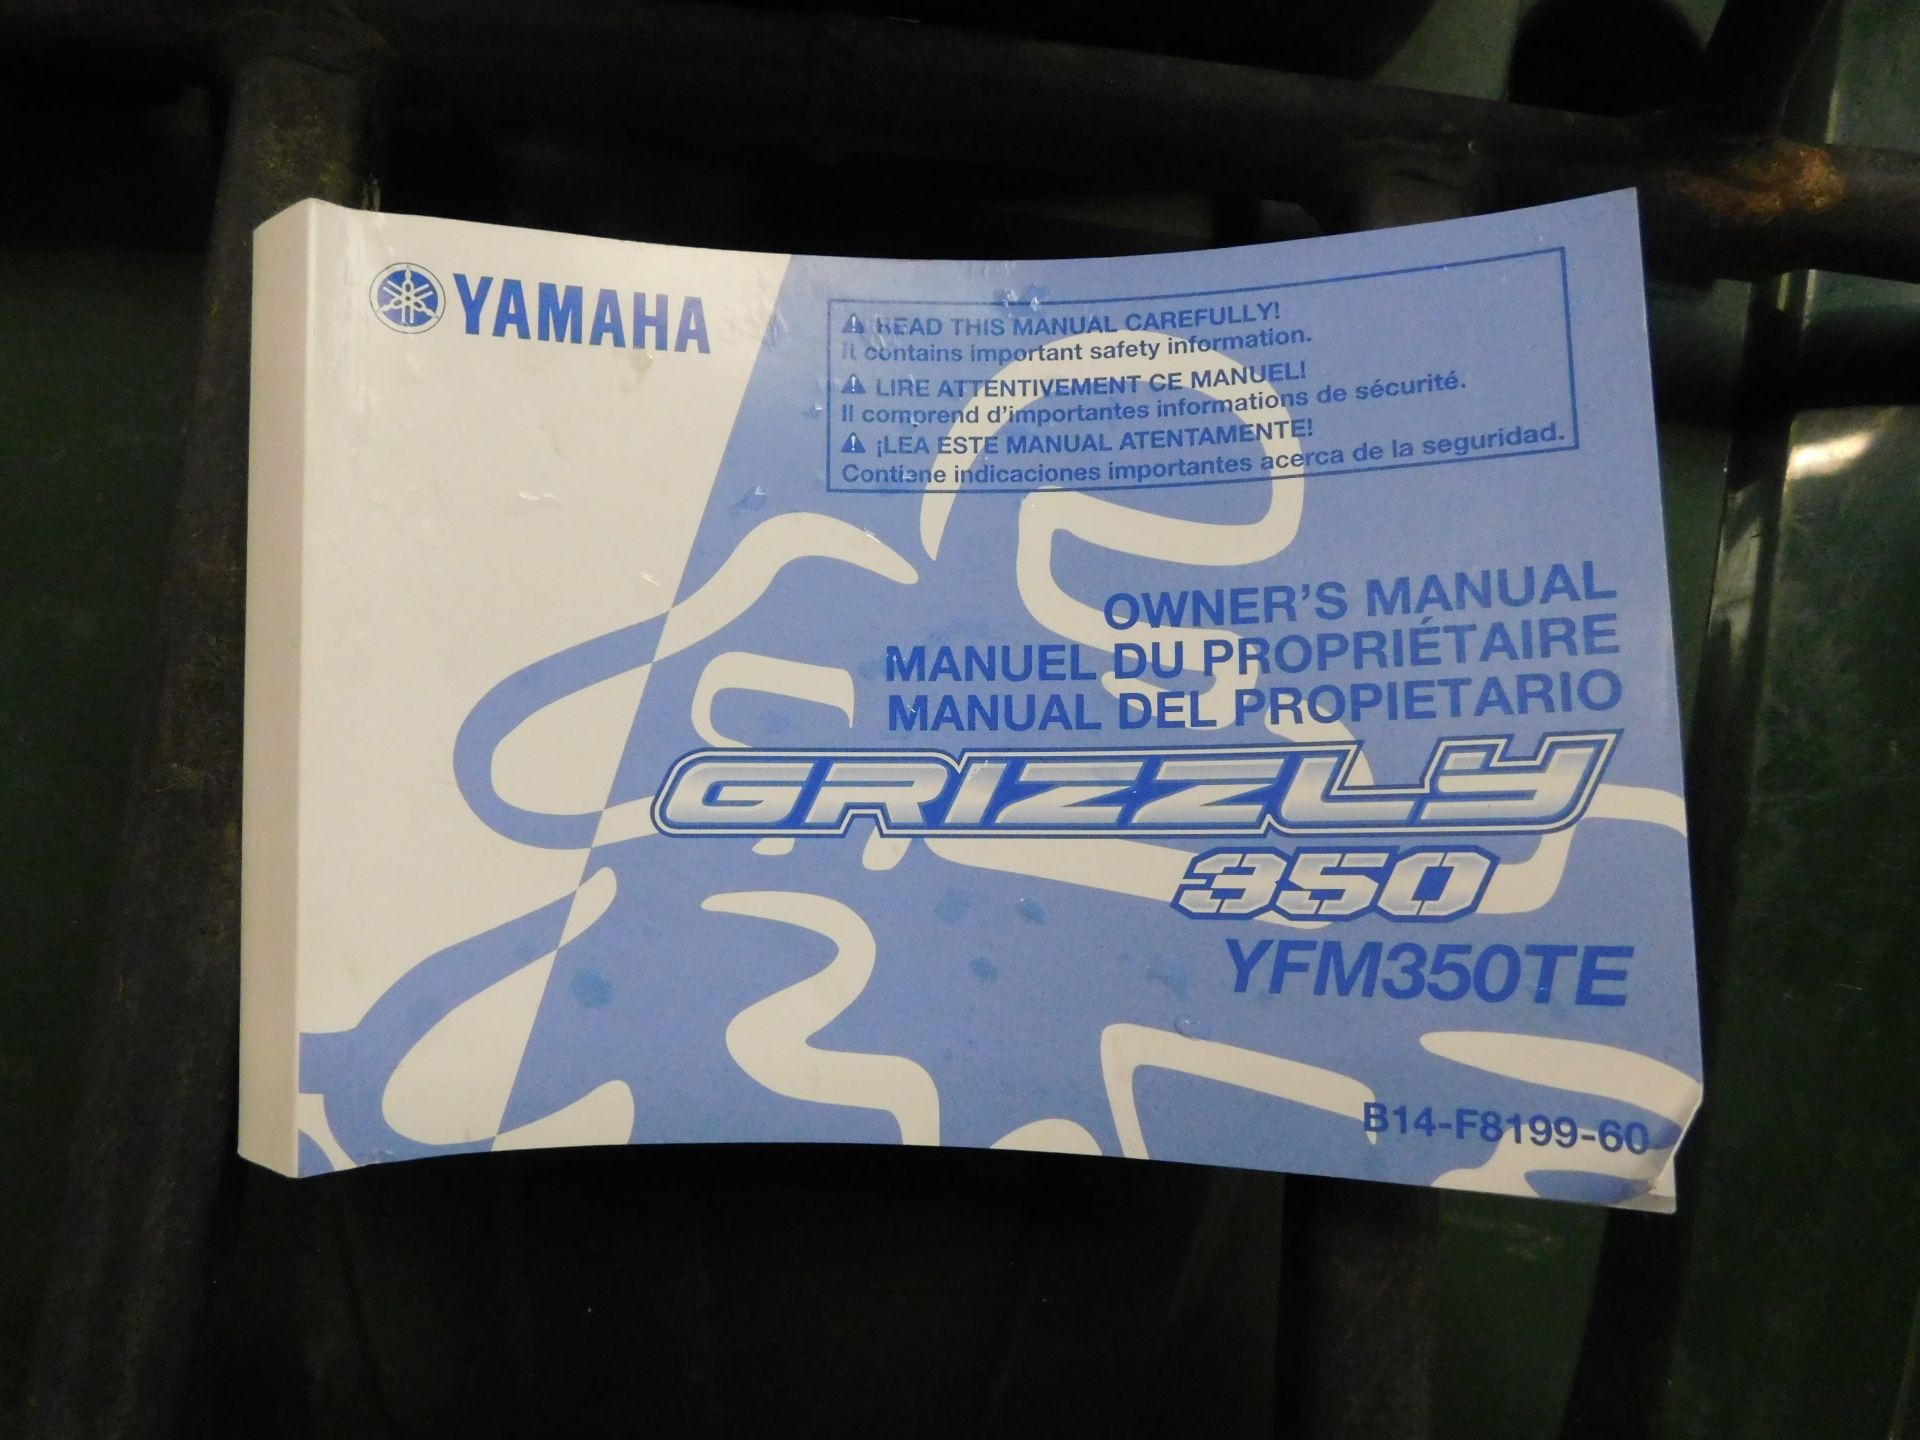 Yamaha Grizzly Ultramatic 350 YFM350TE 2WD Quad Bike (Service History Available) (Location - Image 3 of 6